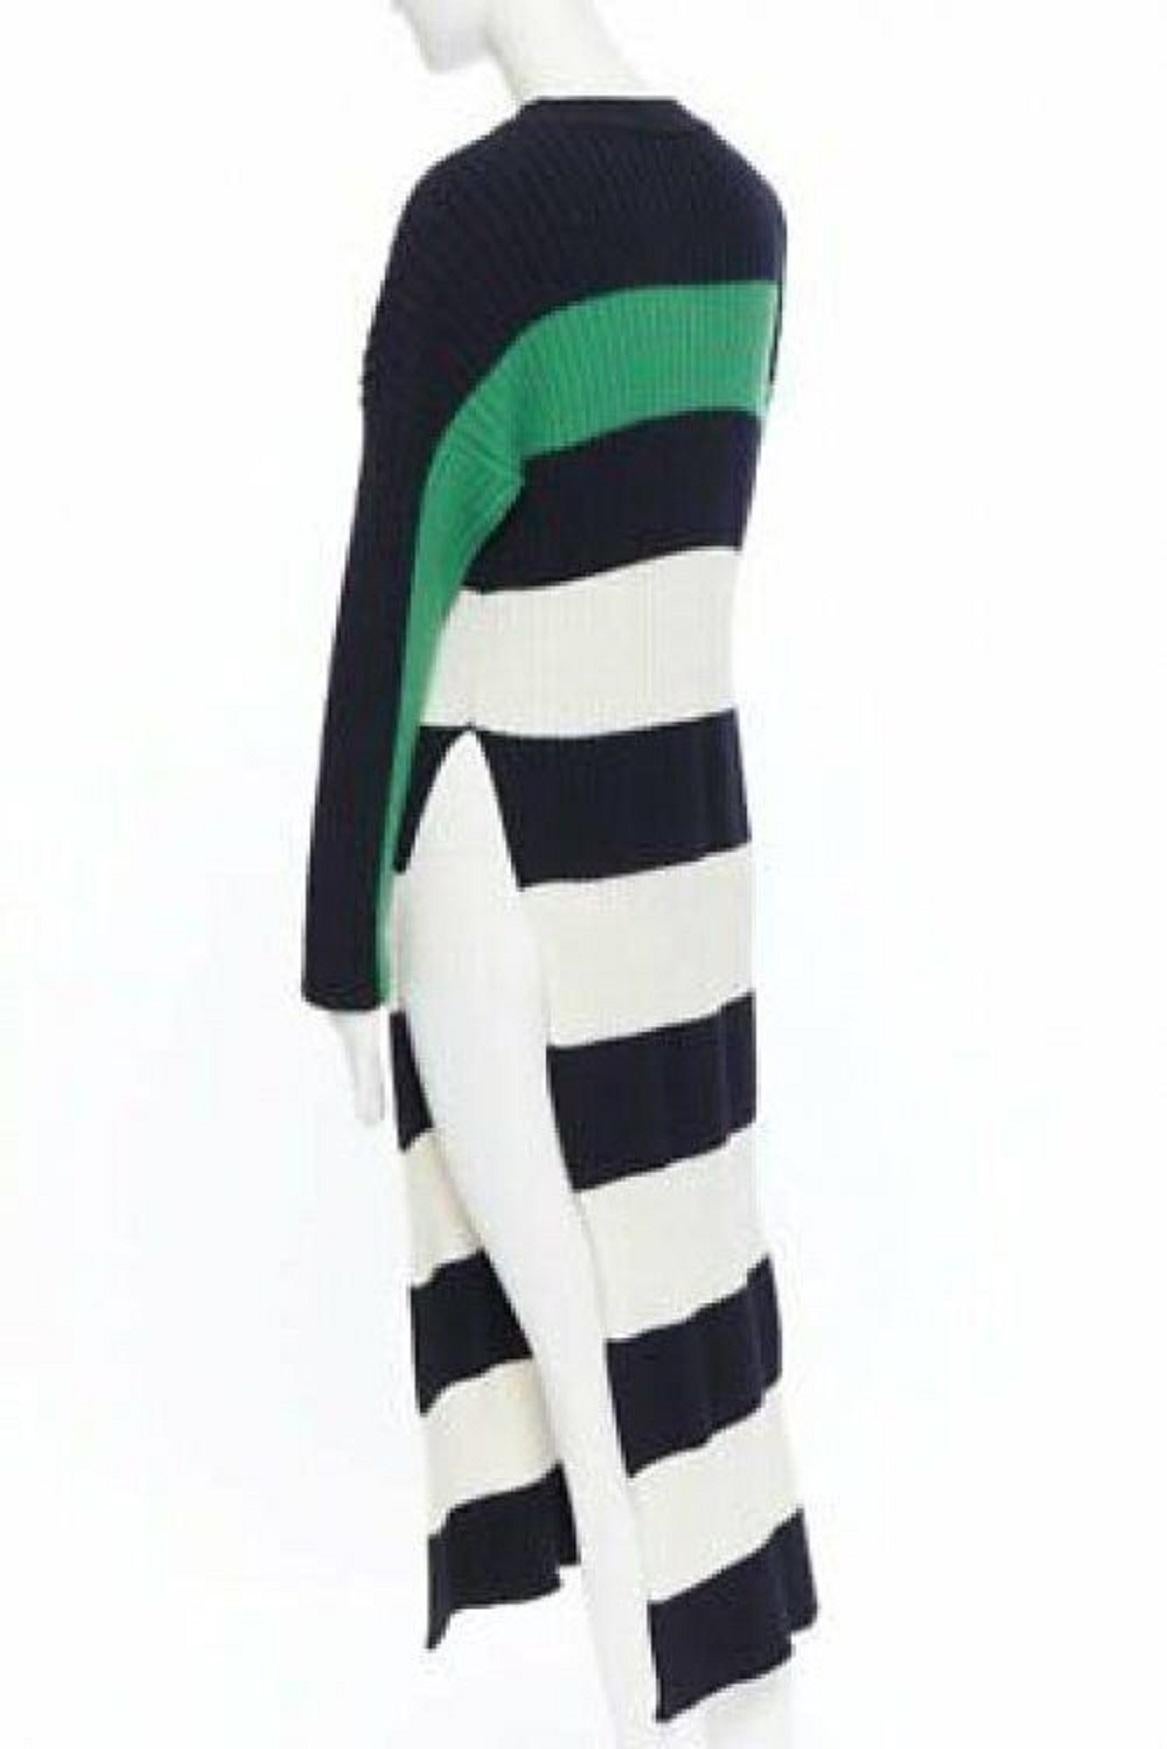 STELLA MCCARTNEY navy green white stripe virgin wool knit split side sweater S
Reference: TGAS/A03859
Brand: Stella McCartney
Designer: Stella McCartney
Material: Wool
Color: Multicolour
Pattern: Striped
Made in: Italy

CONDITION:
Condition: